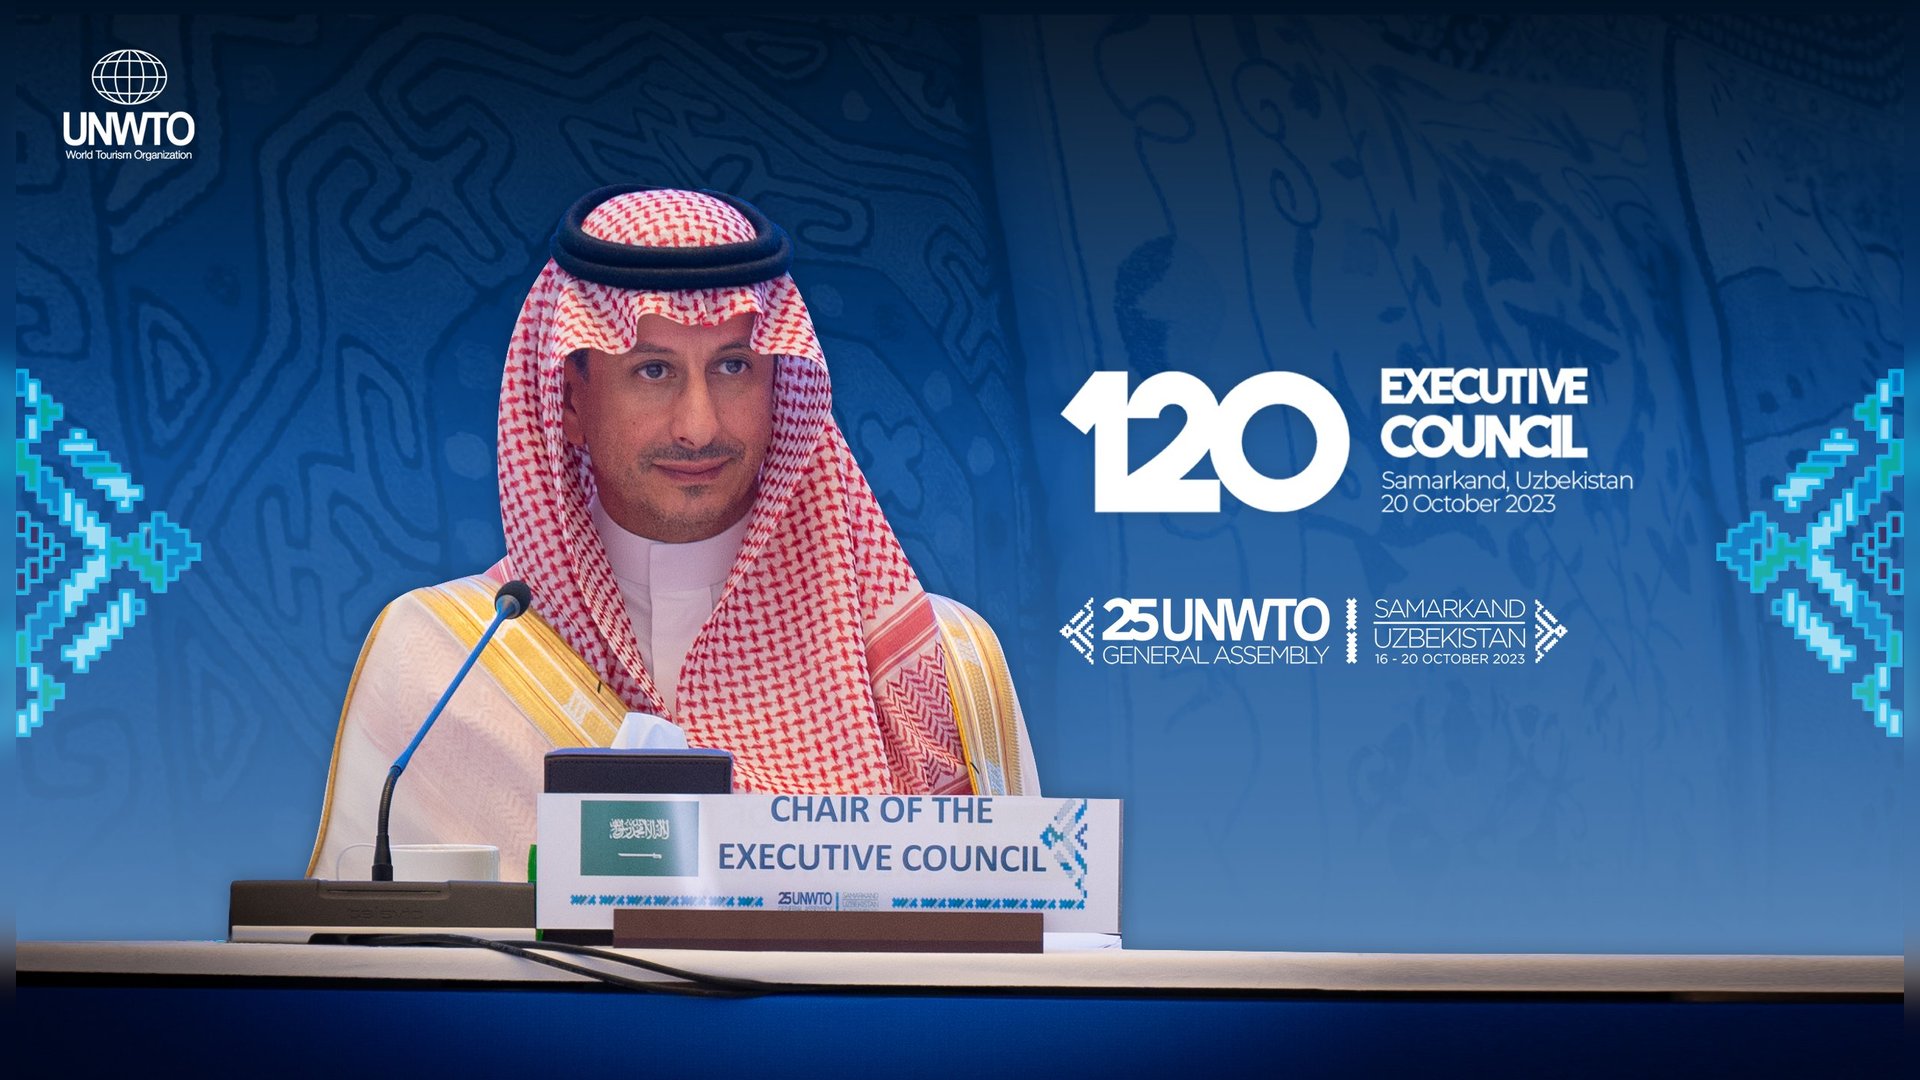 Saudi Arabia Successfully Re-Elected as Chair of the UNWTO Executive Council for 2024